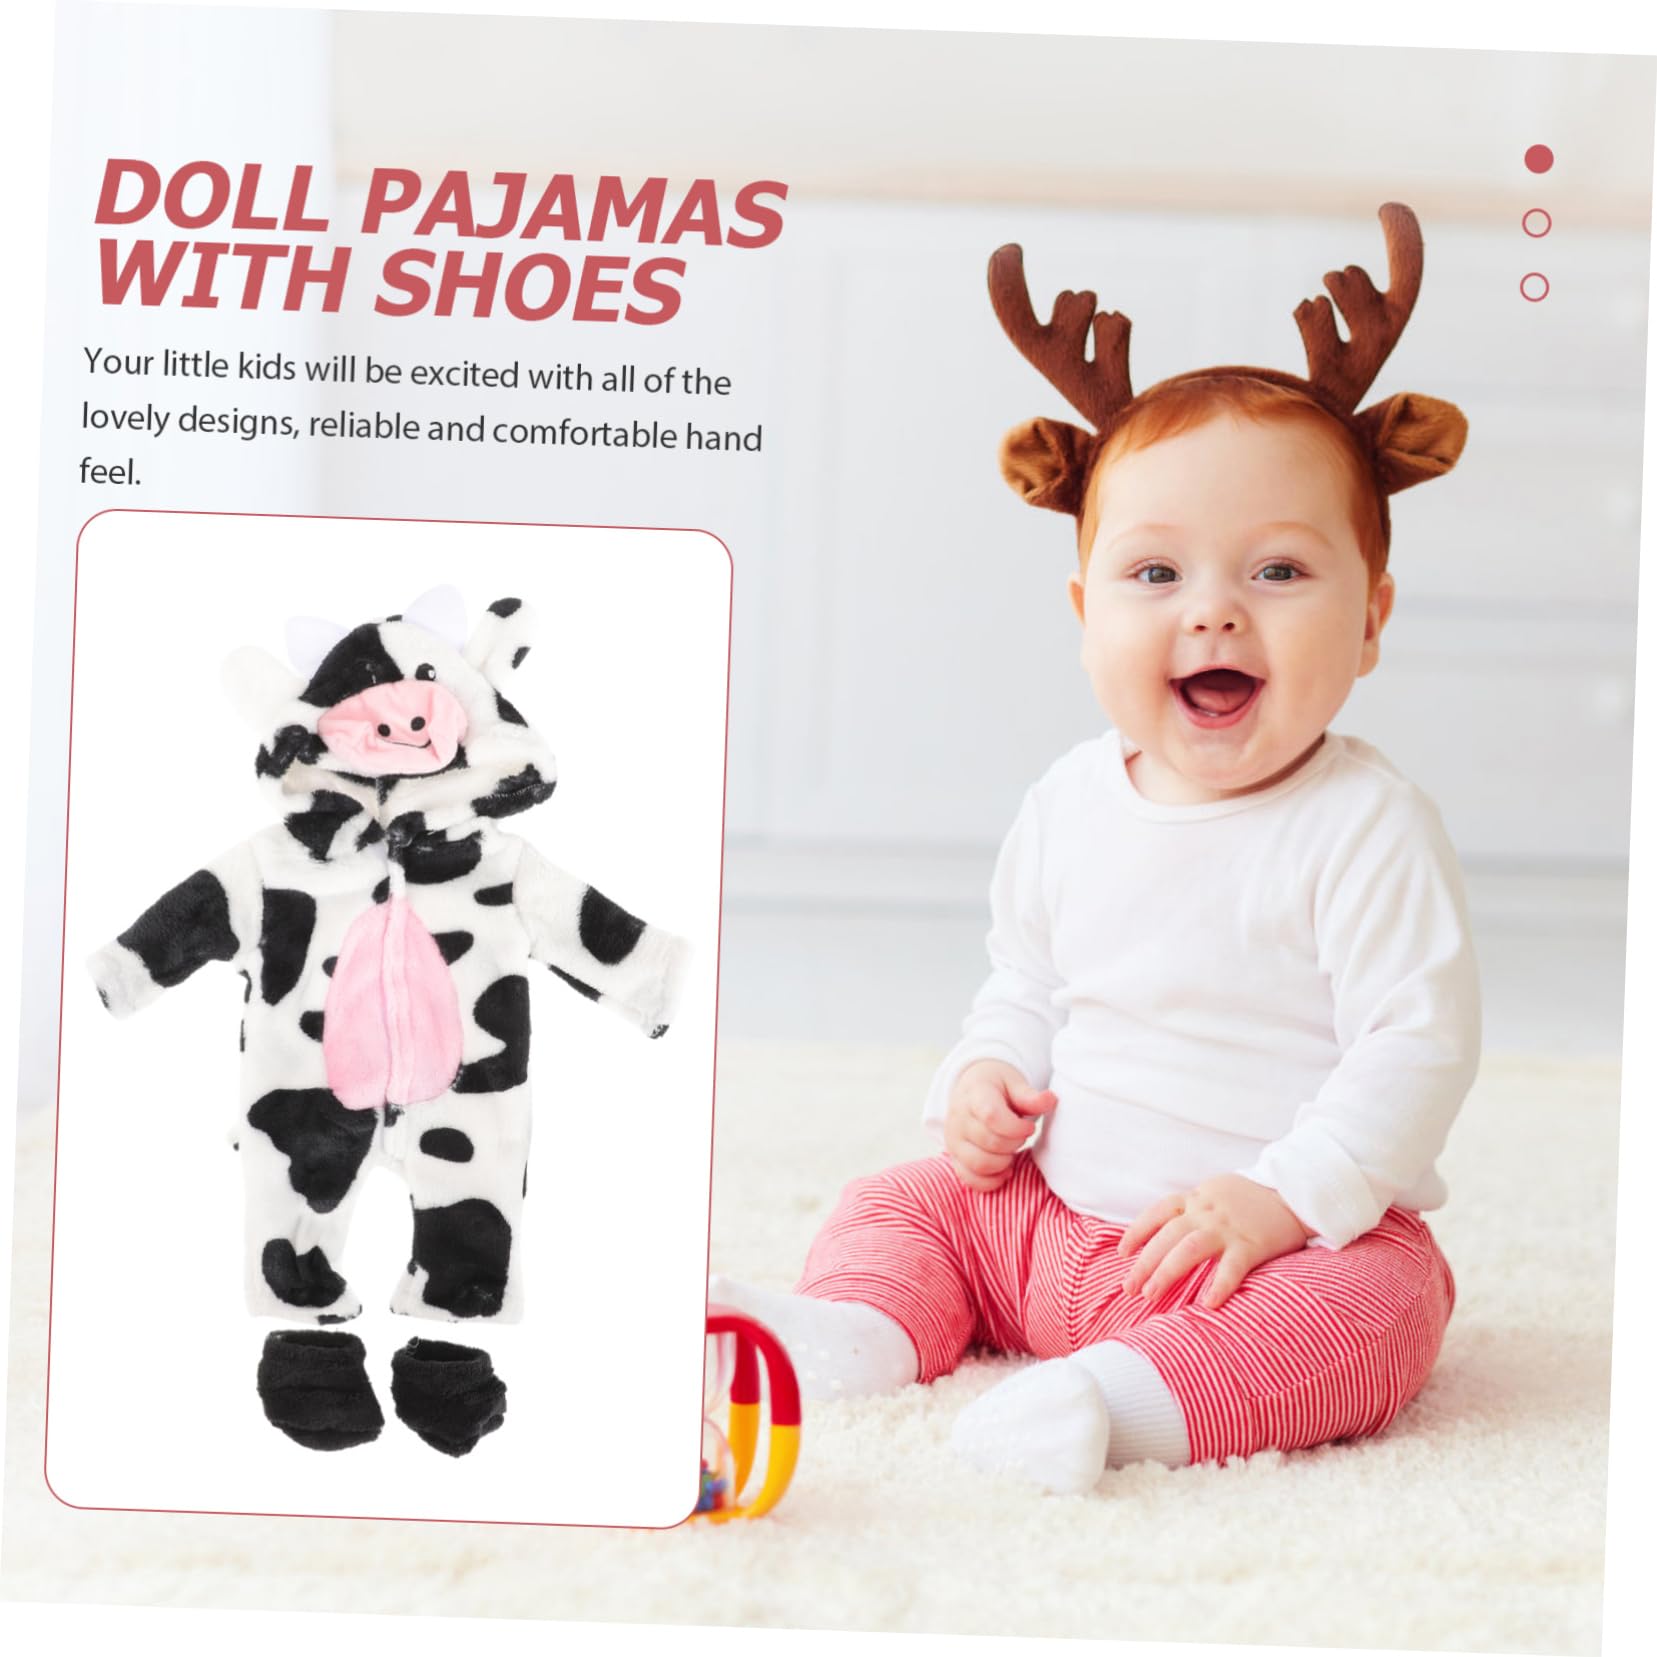 ERINGOGO 1 Set 18 Inch Doll Cow Costumes Kids Dress up Party Costume 18 Inch Doll Outfit 18 Inch Doll Pjs Lovely Outfits Baby Costume Doll Decor Cow Pajamas Animal Cloth Jumpsuit Child